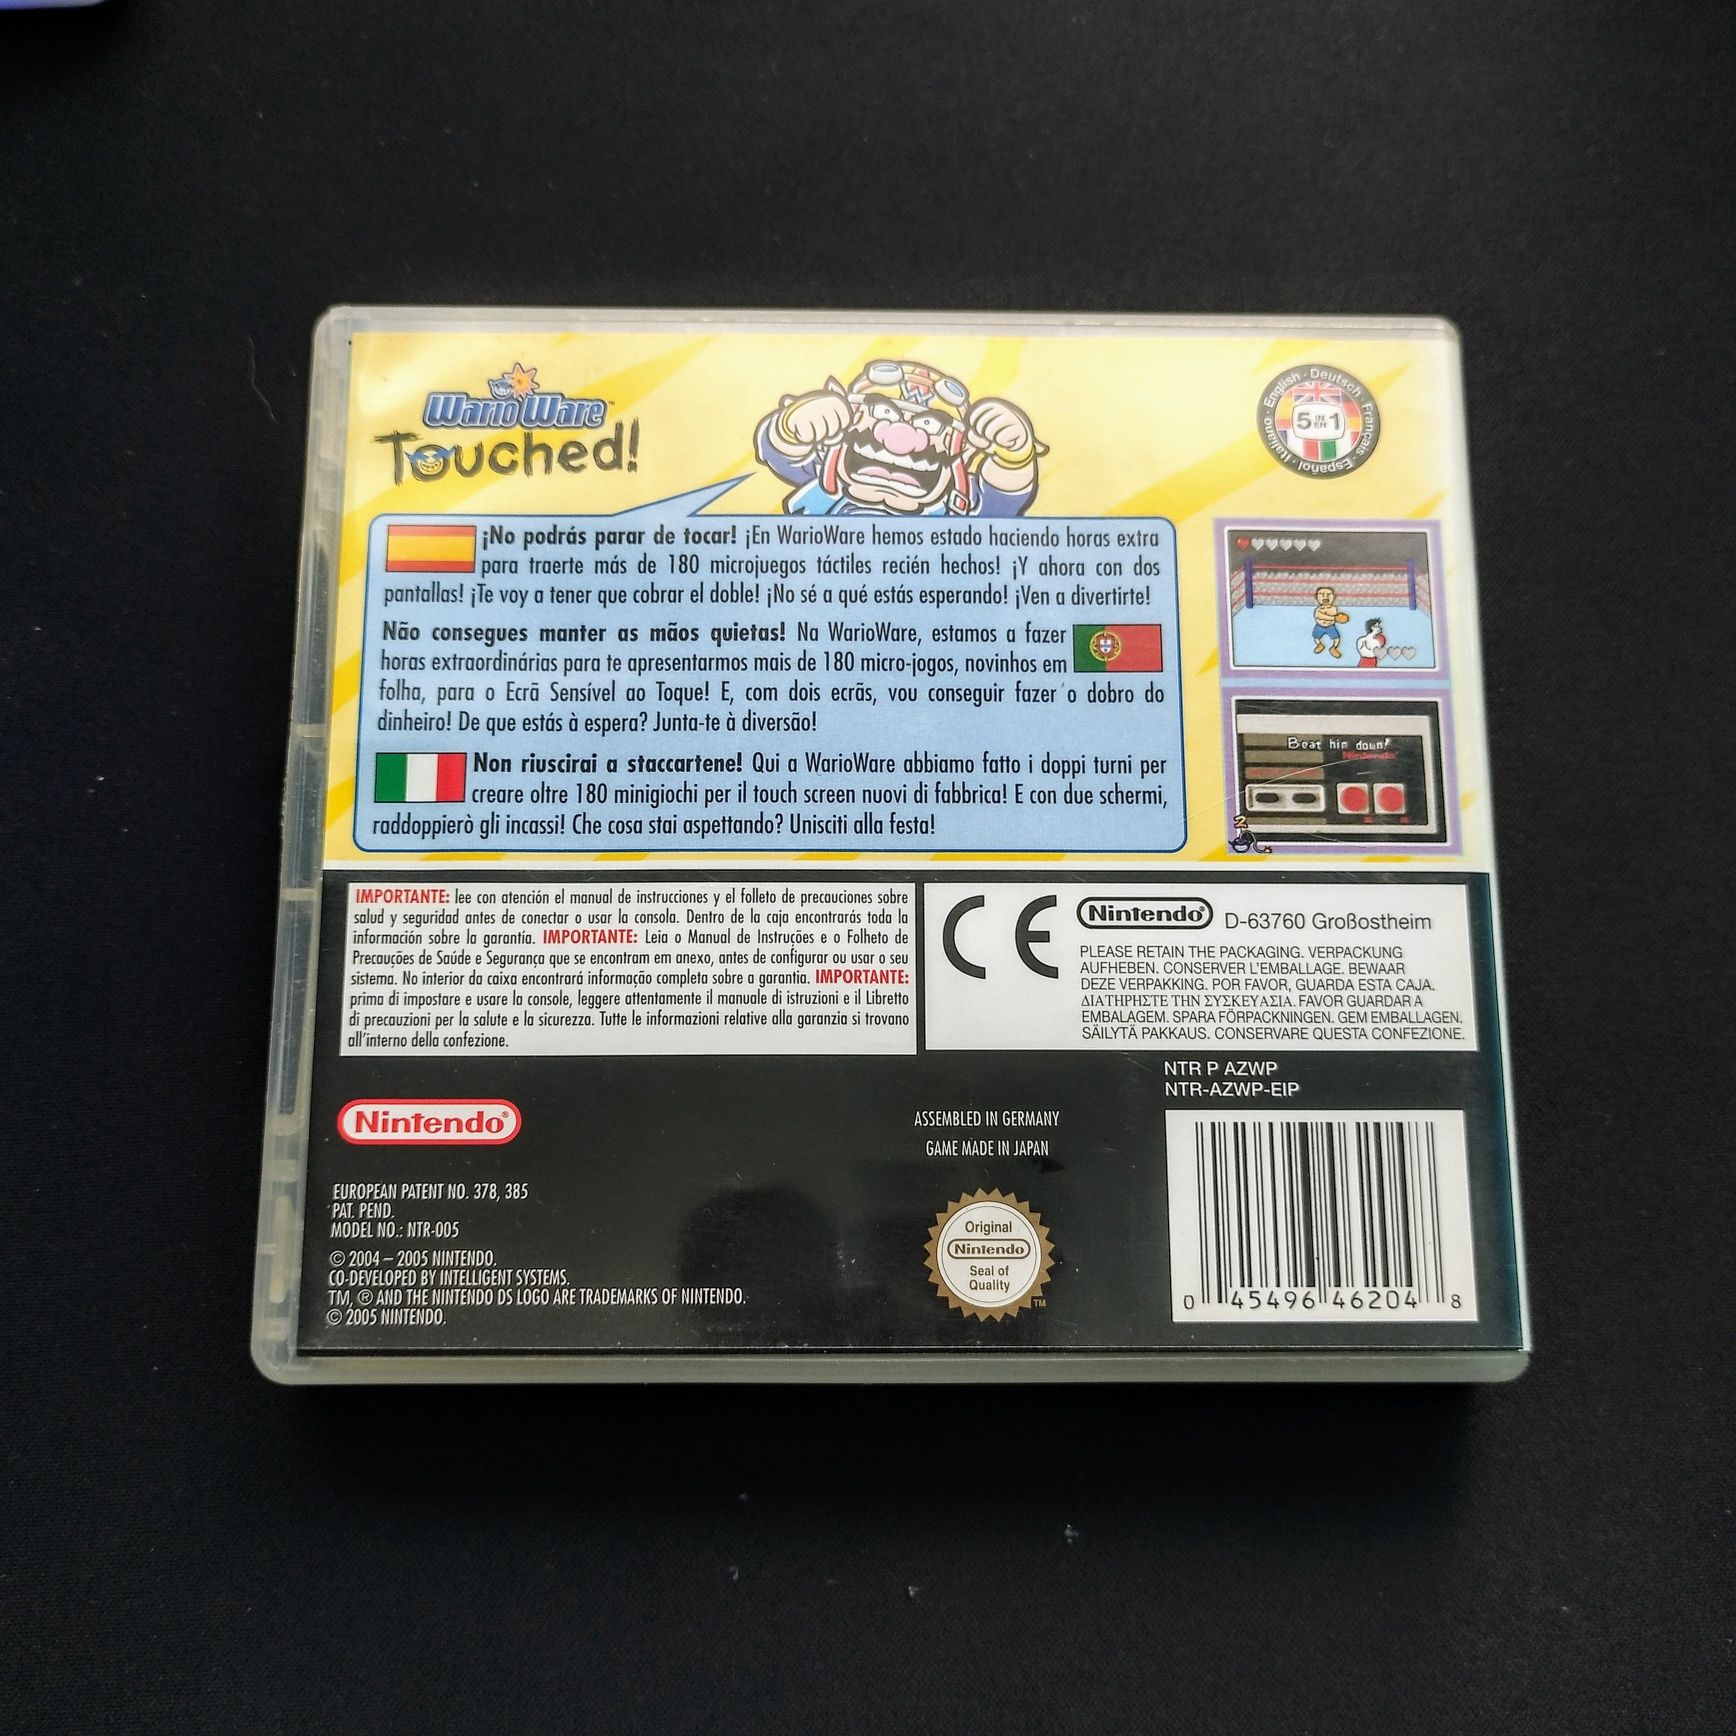 WarioWare Touched Nintendo DS / 3DS